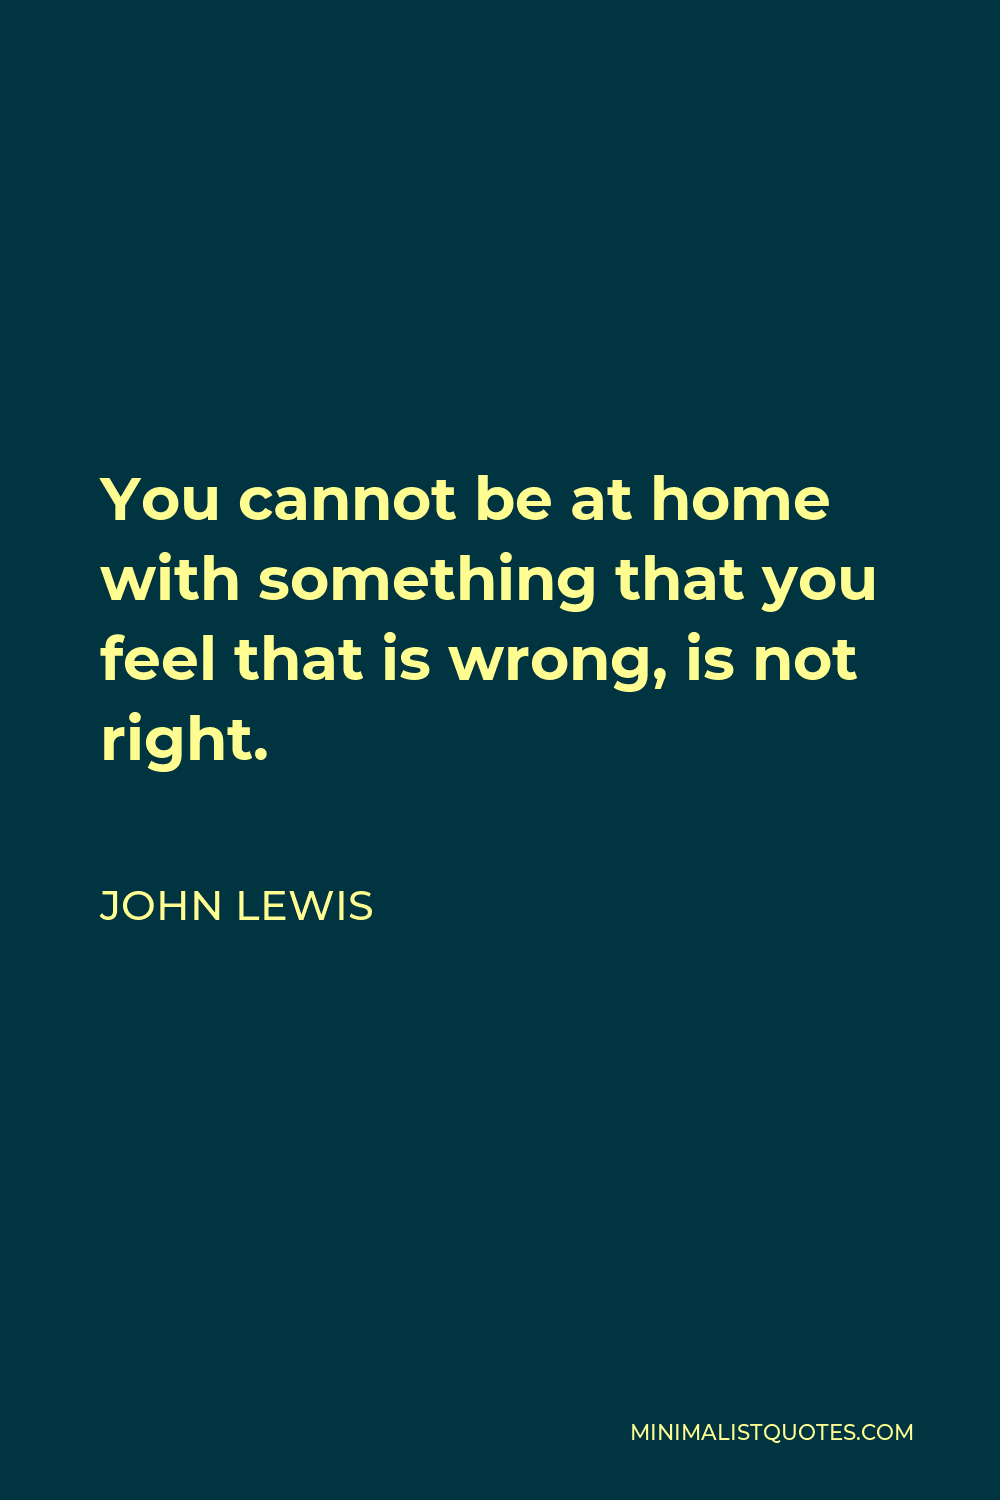 John Lewis Quote - You cannot be at home with something that you feel that is wrong, is not right.